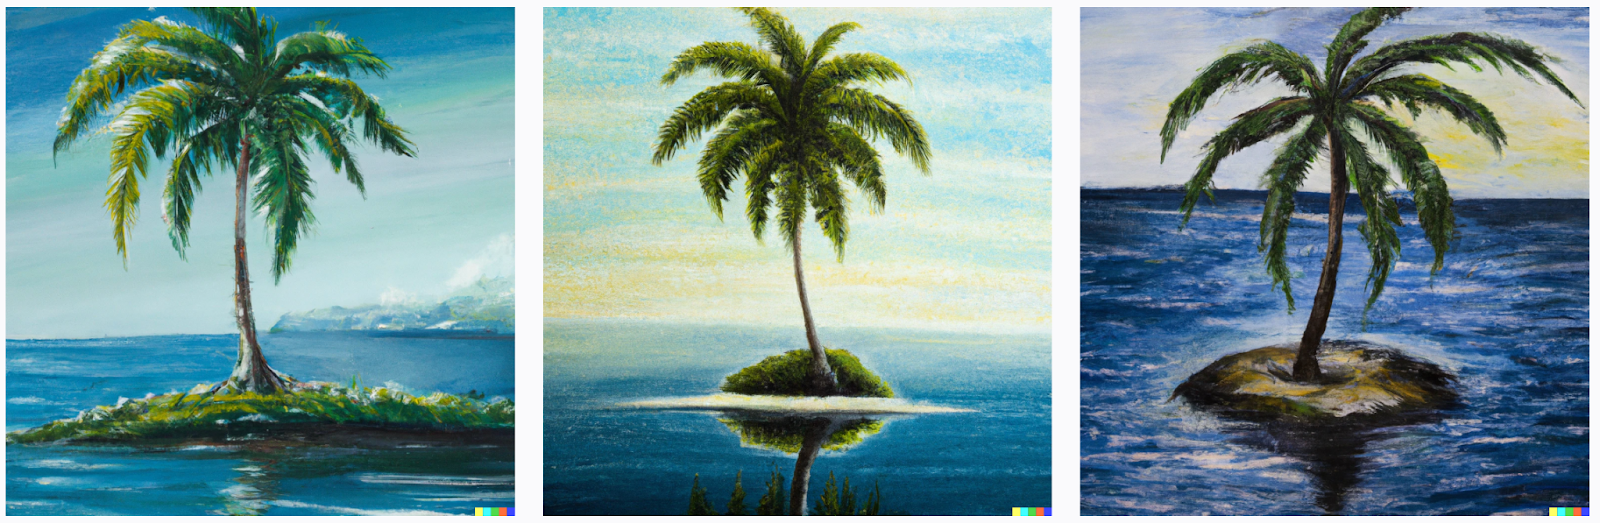 DALL-E results for “An oil painting of a single coconut tree on an island surrounded by water” prompt